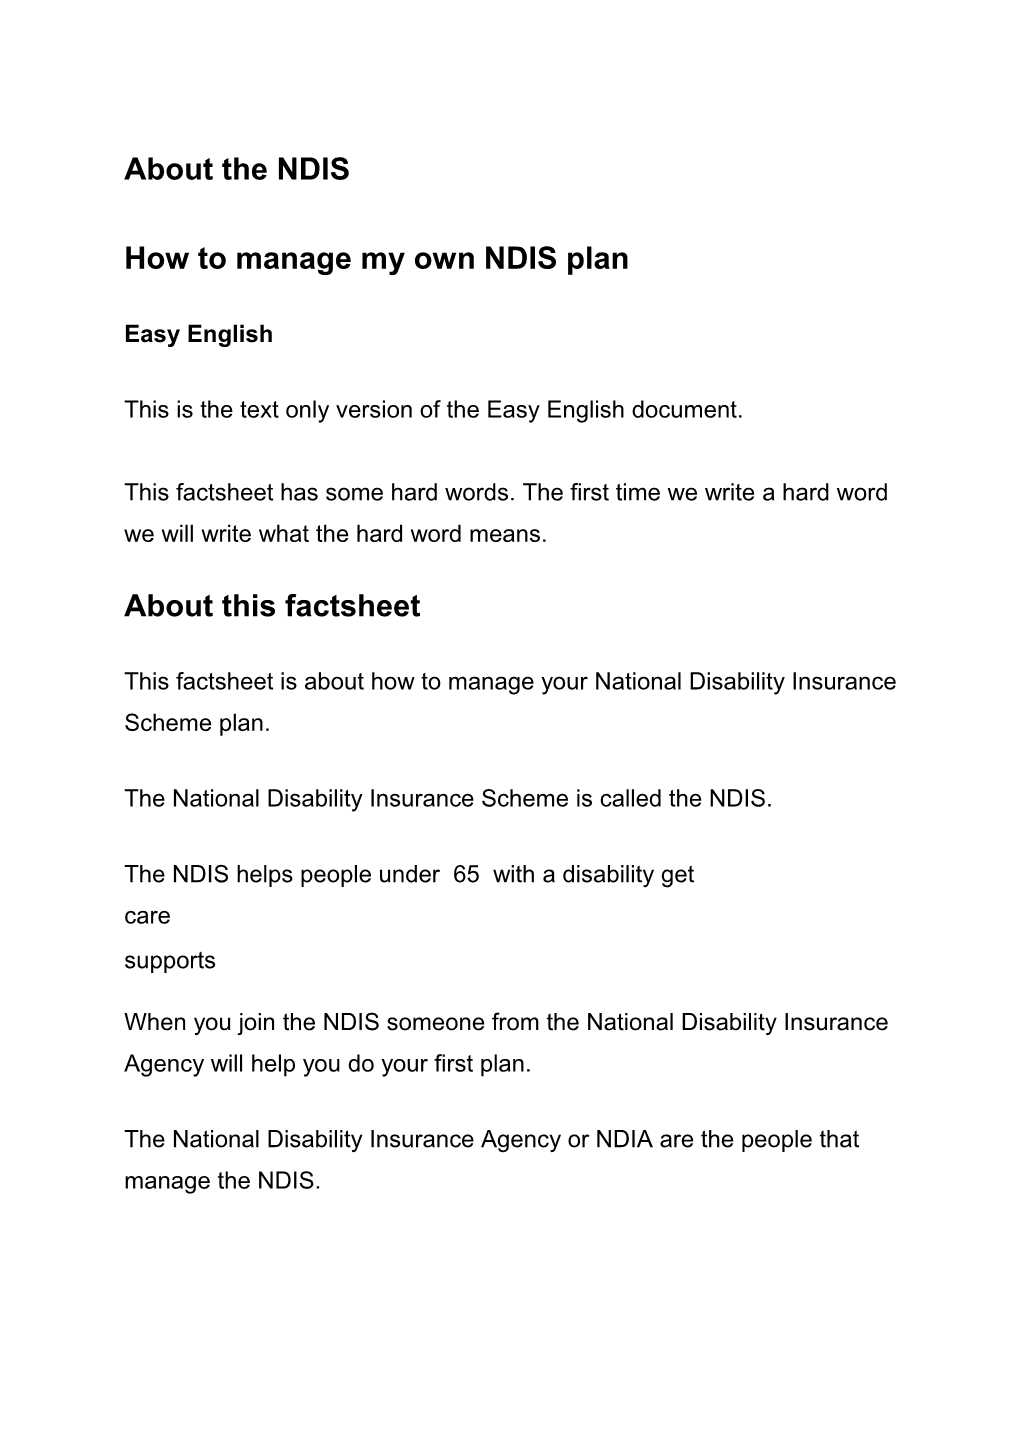 About the NDIS How to Manage My Own NDIS Plan